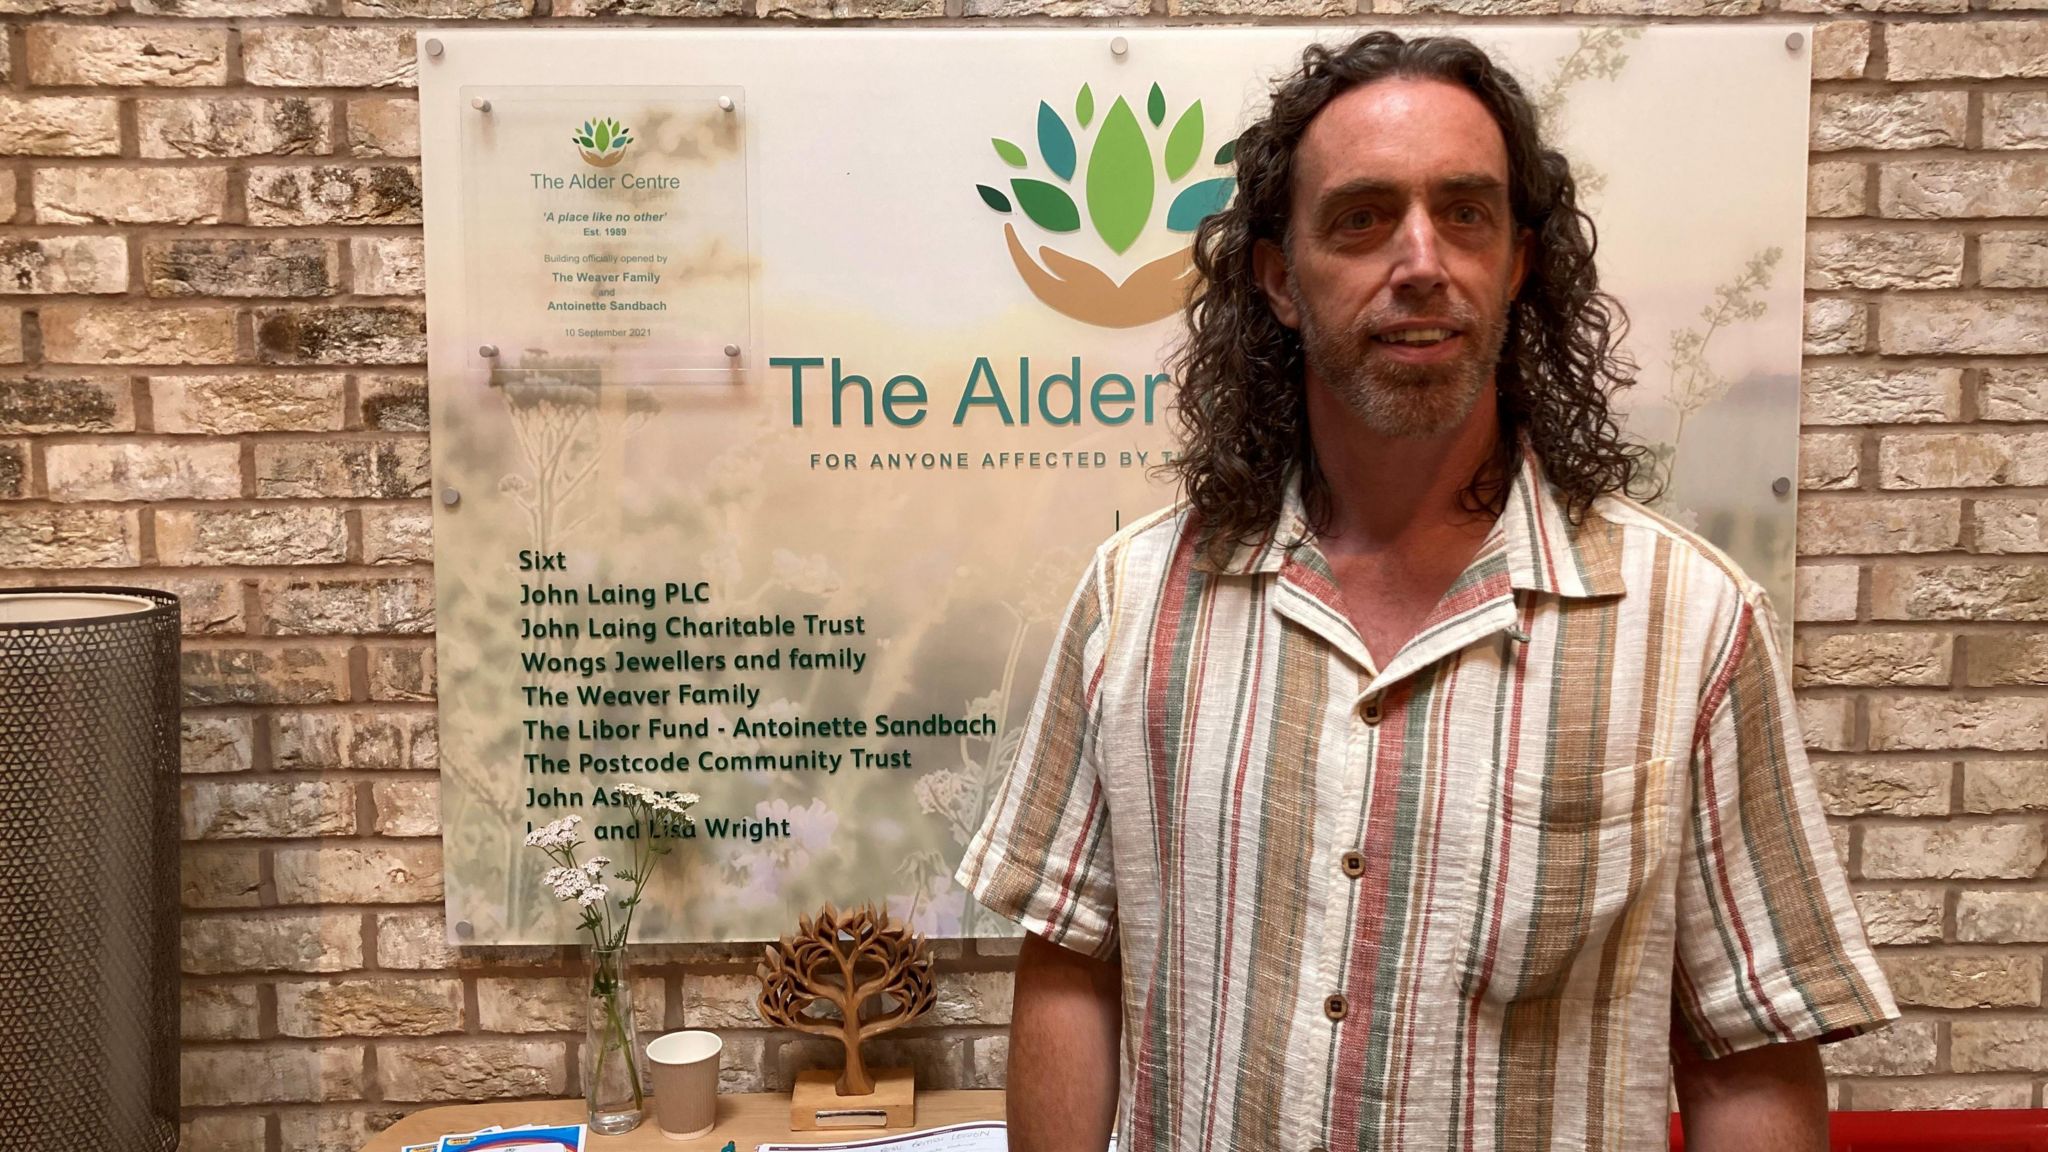 Simon Riley wears a striped cream, red, brown and green short sleeved linen shirt, smiling in front of a sign for the the Alder Centre